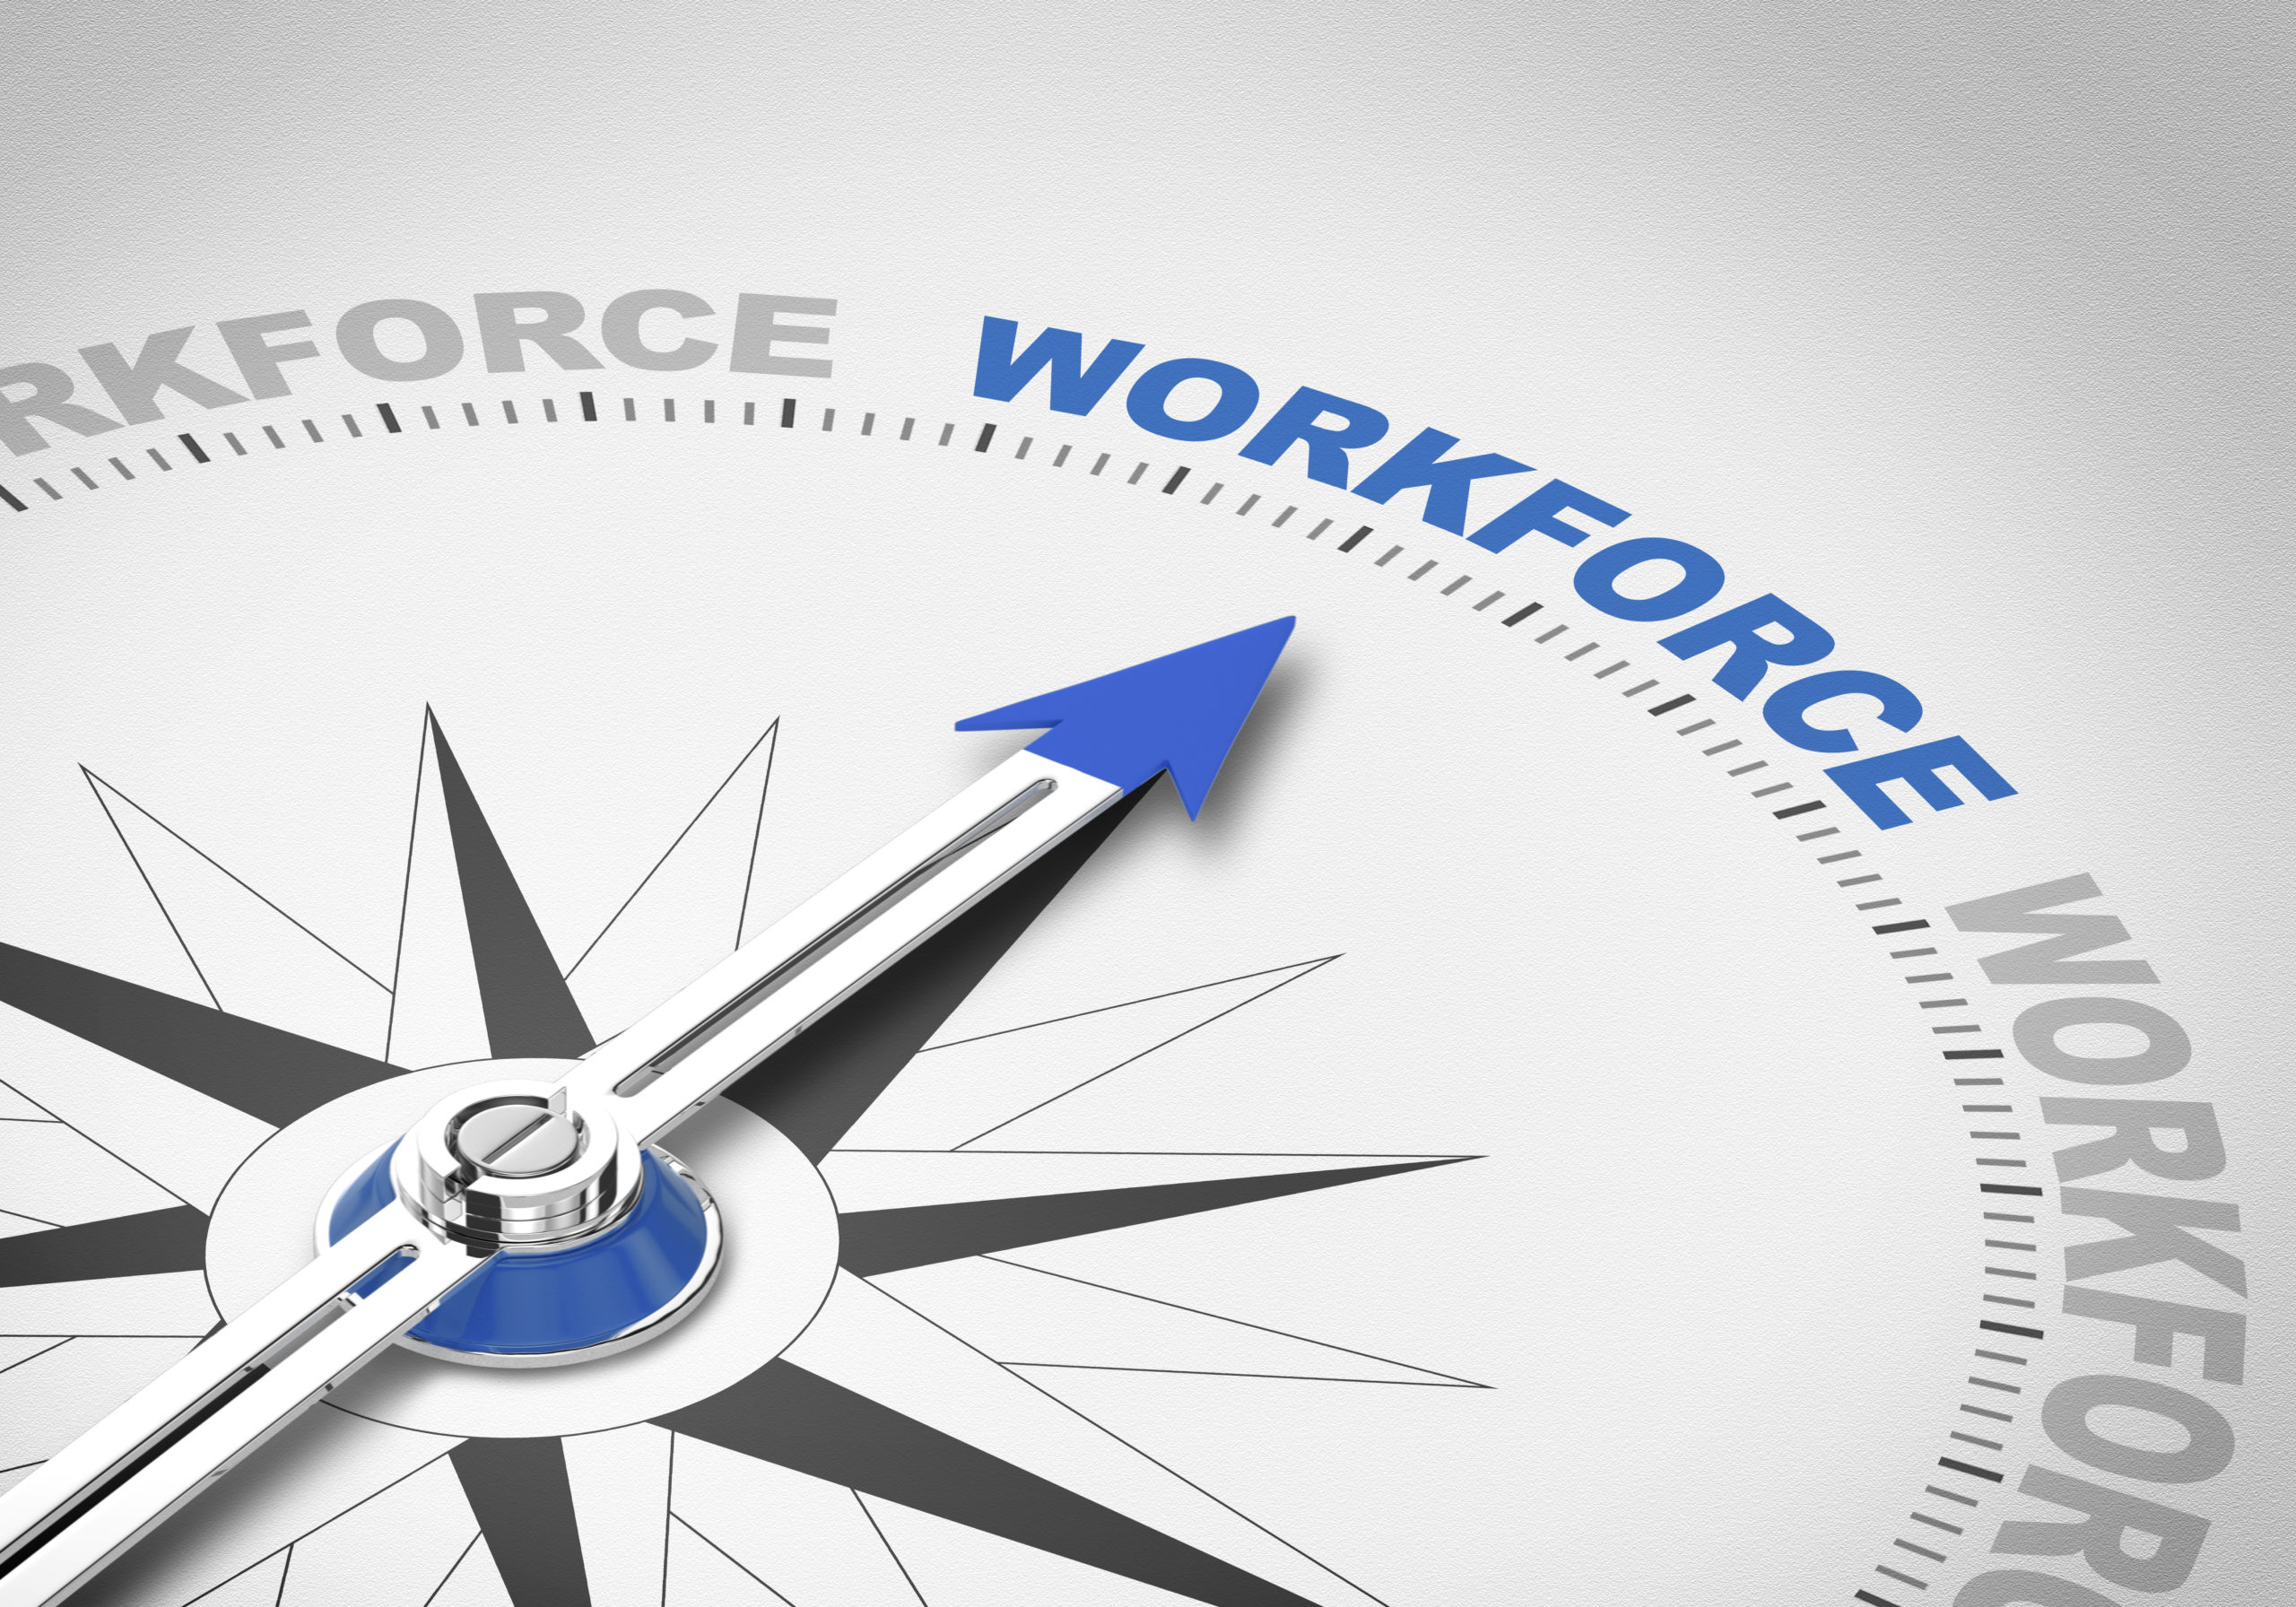 compass pointing to the word "WORKFORCE"